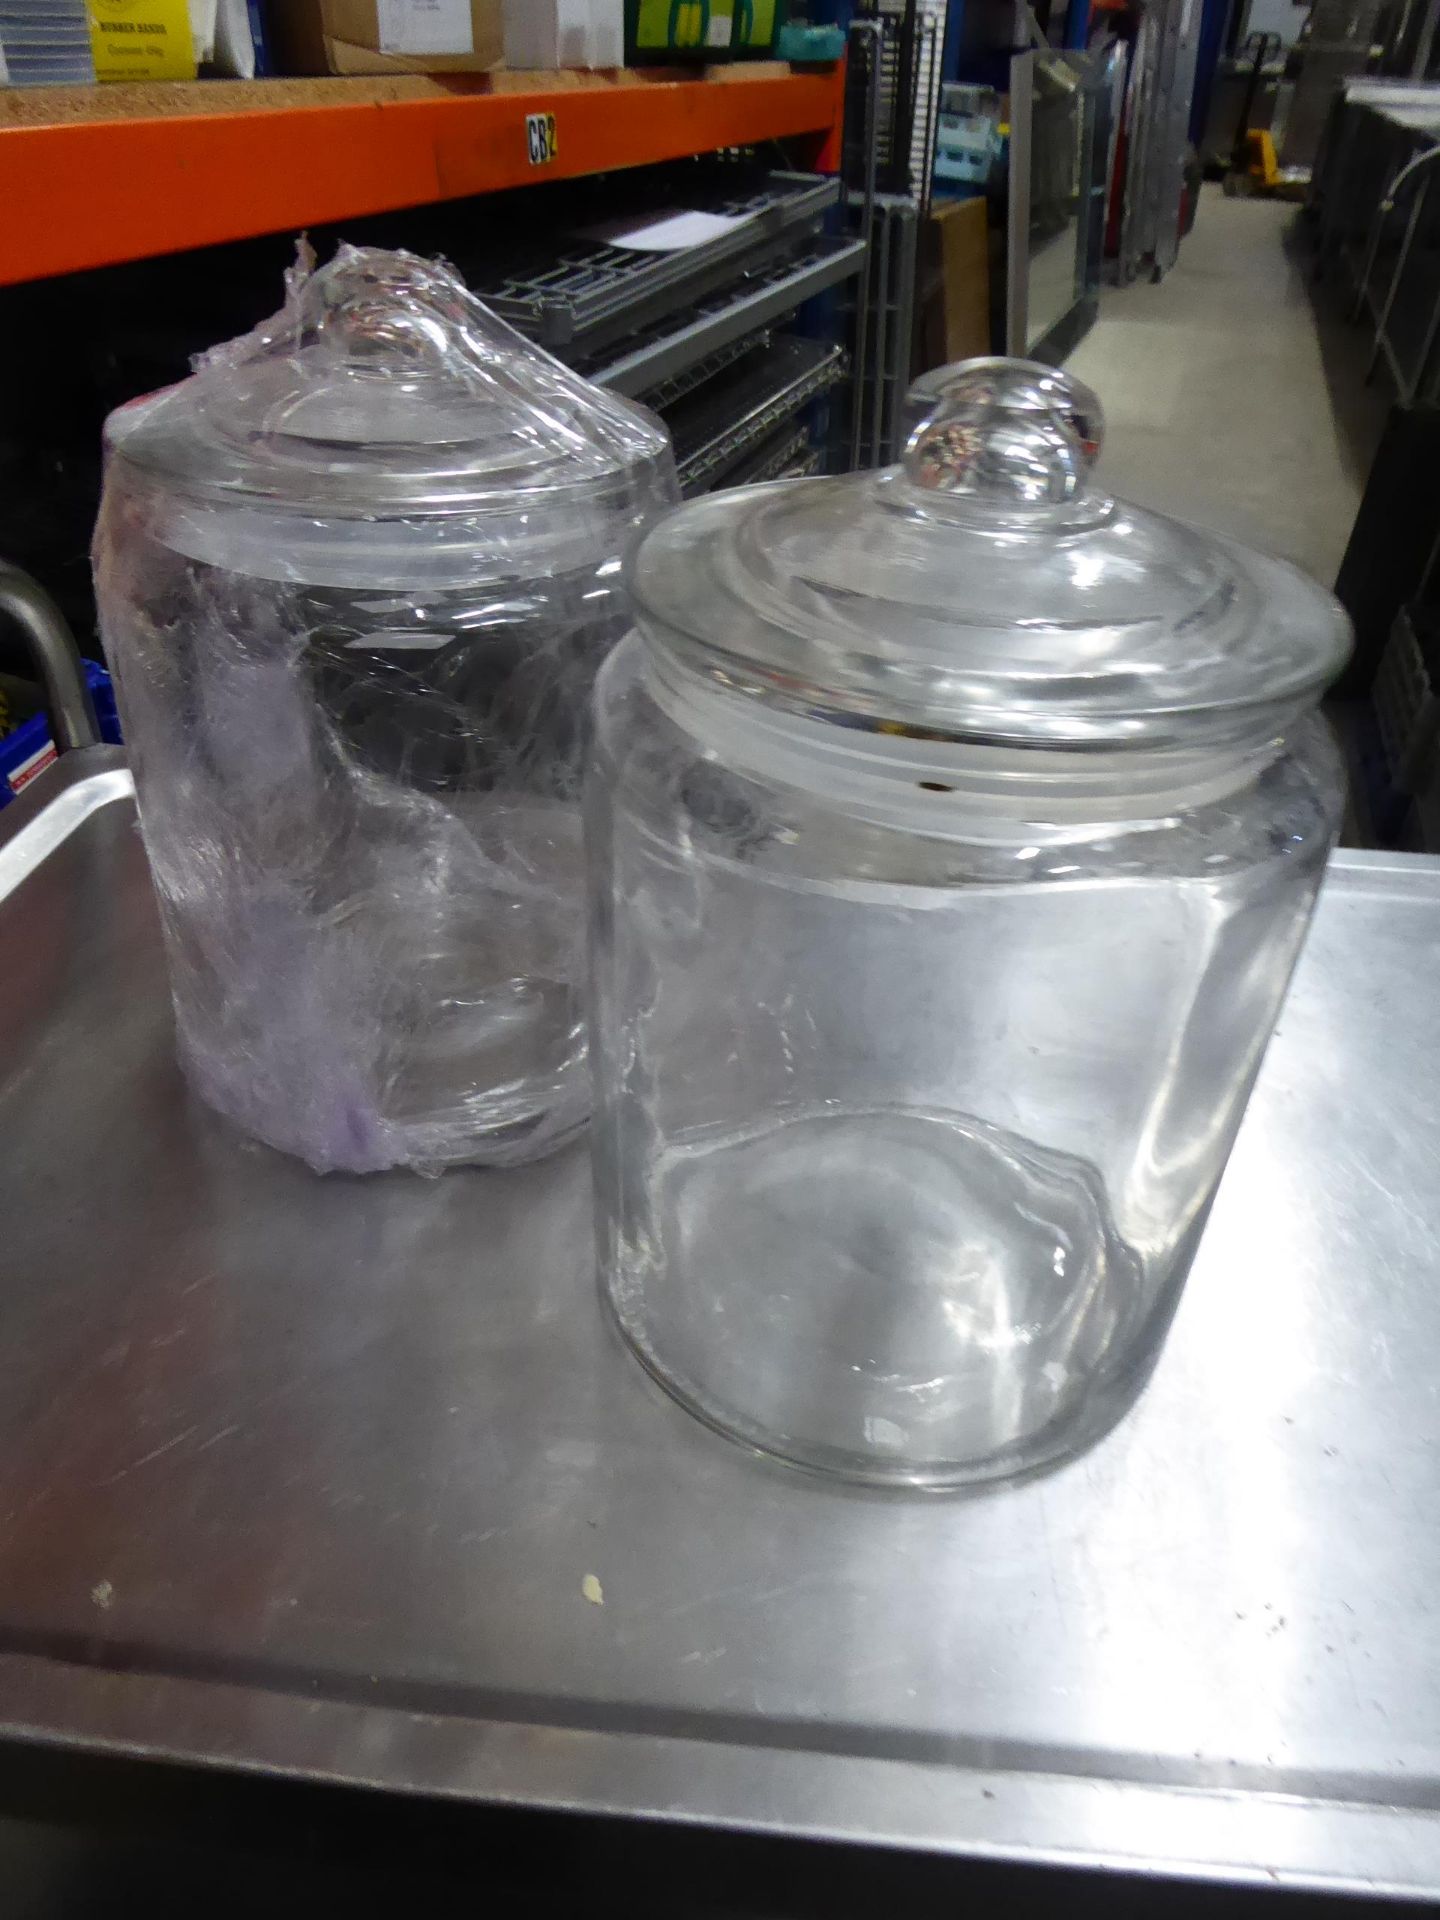 * 2 x large glass cookie jars with lids